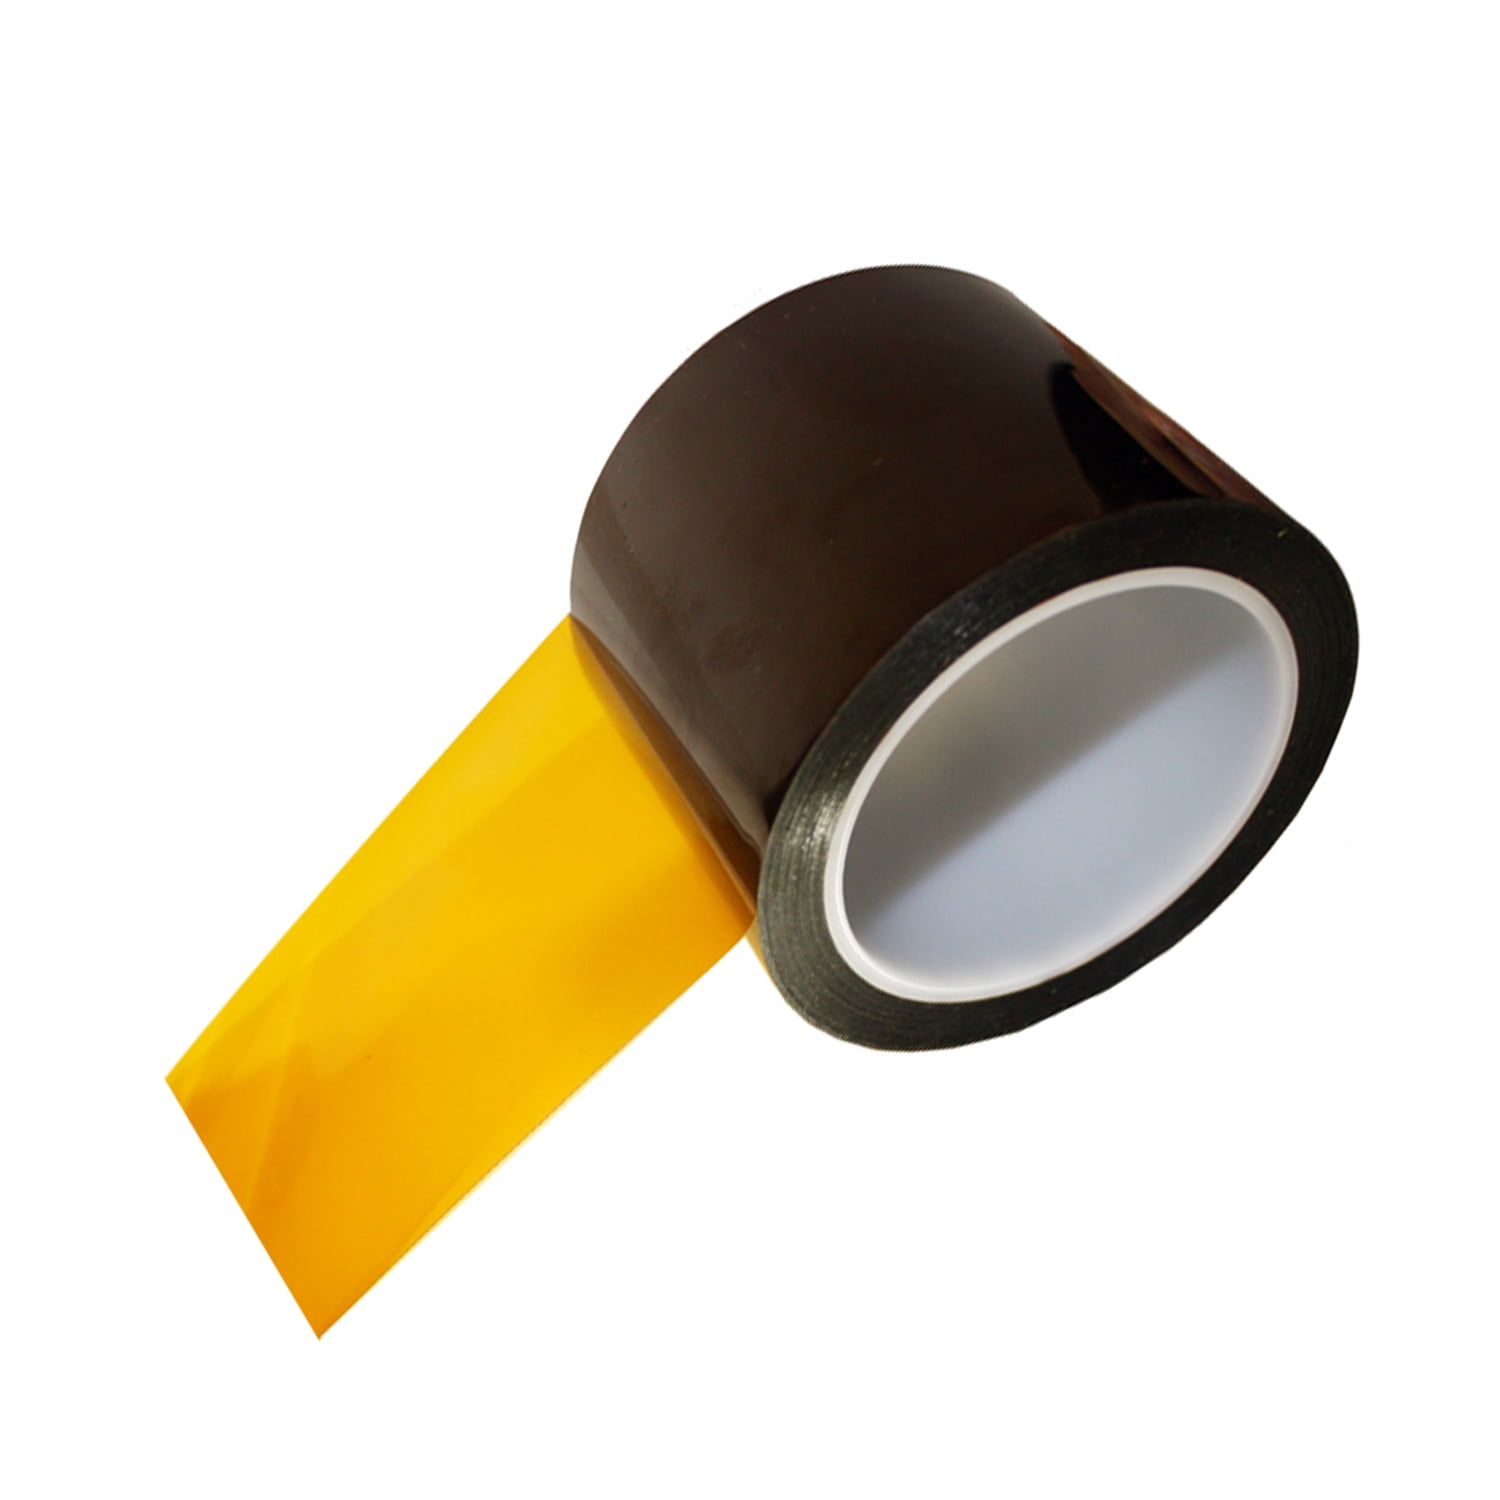 2 Size 7/8" Lot Of High Temperature Kapton Polyimide Masking Tape 36 Yd 